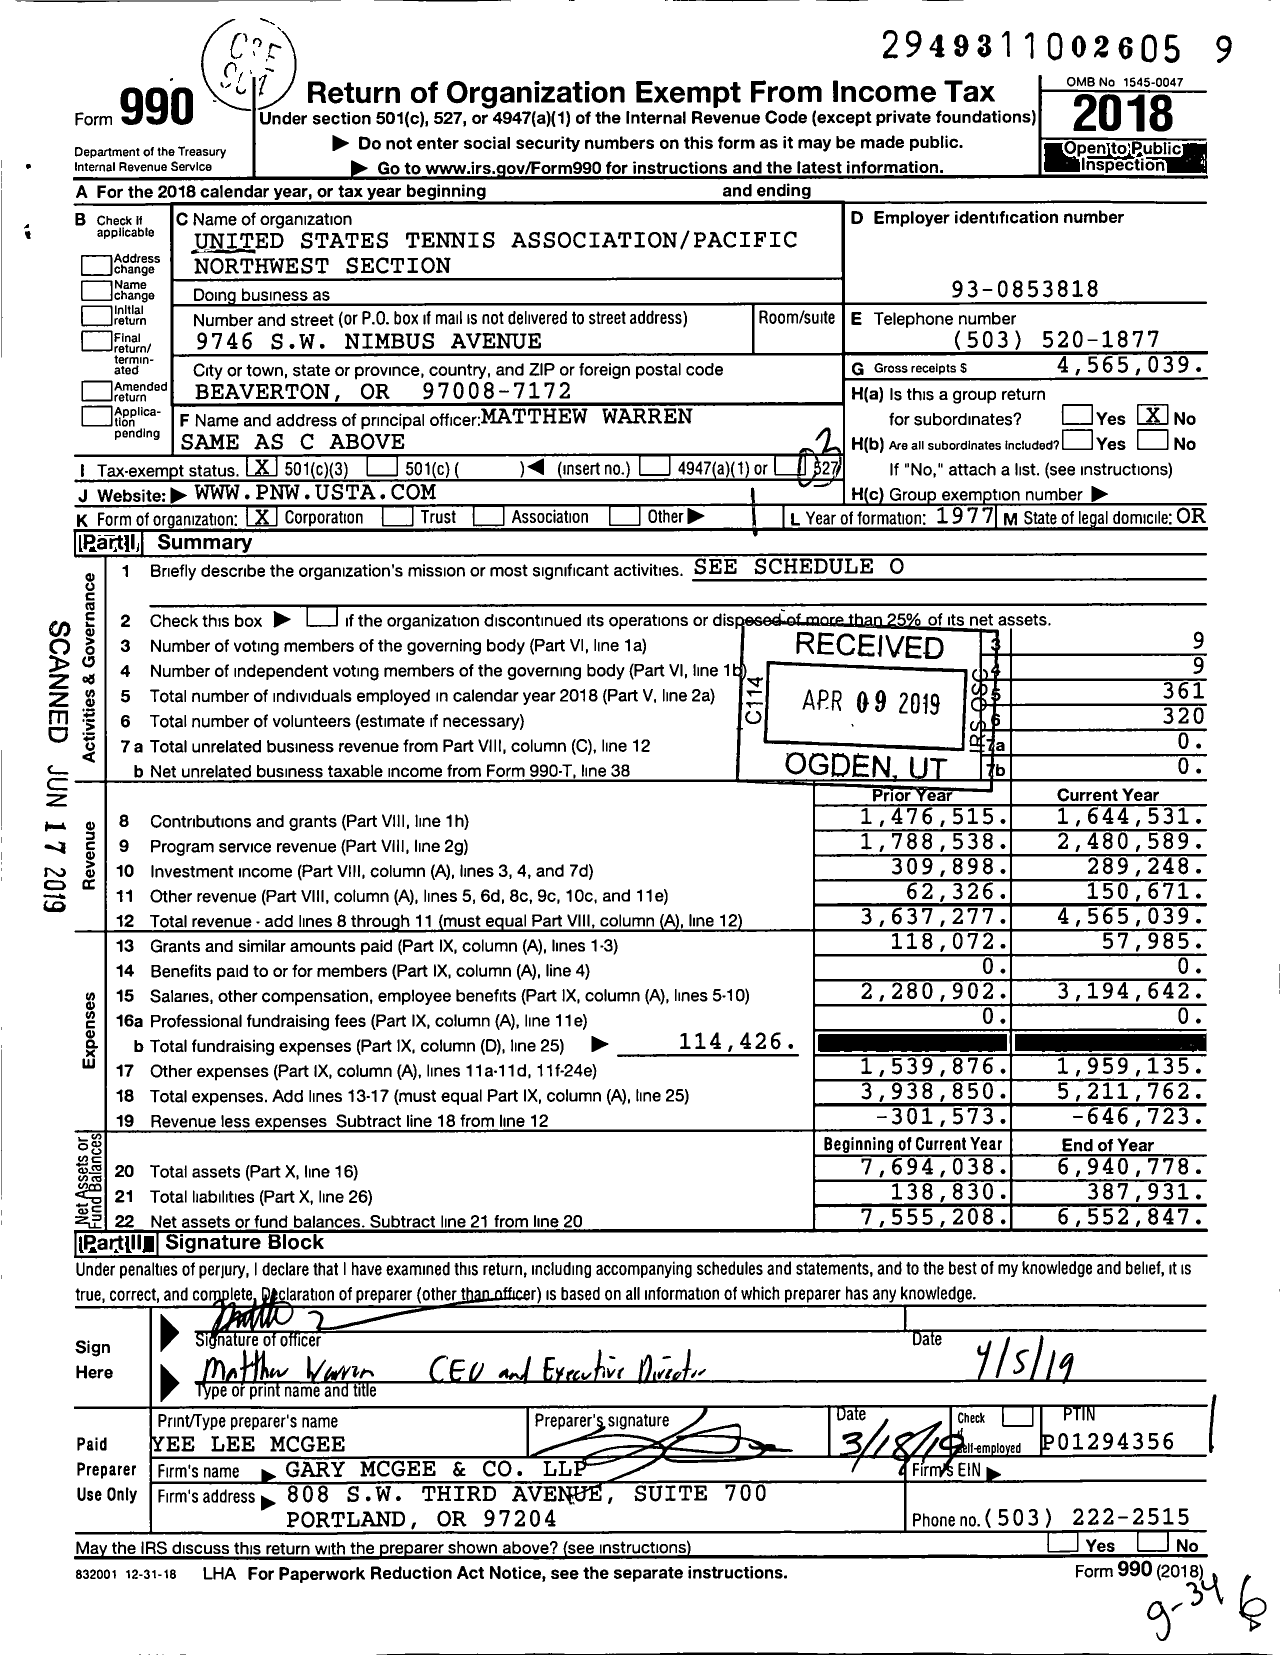 Image of first page of 2018 Form 990 for Usta-Pacific Northwest Section